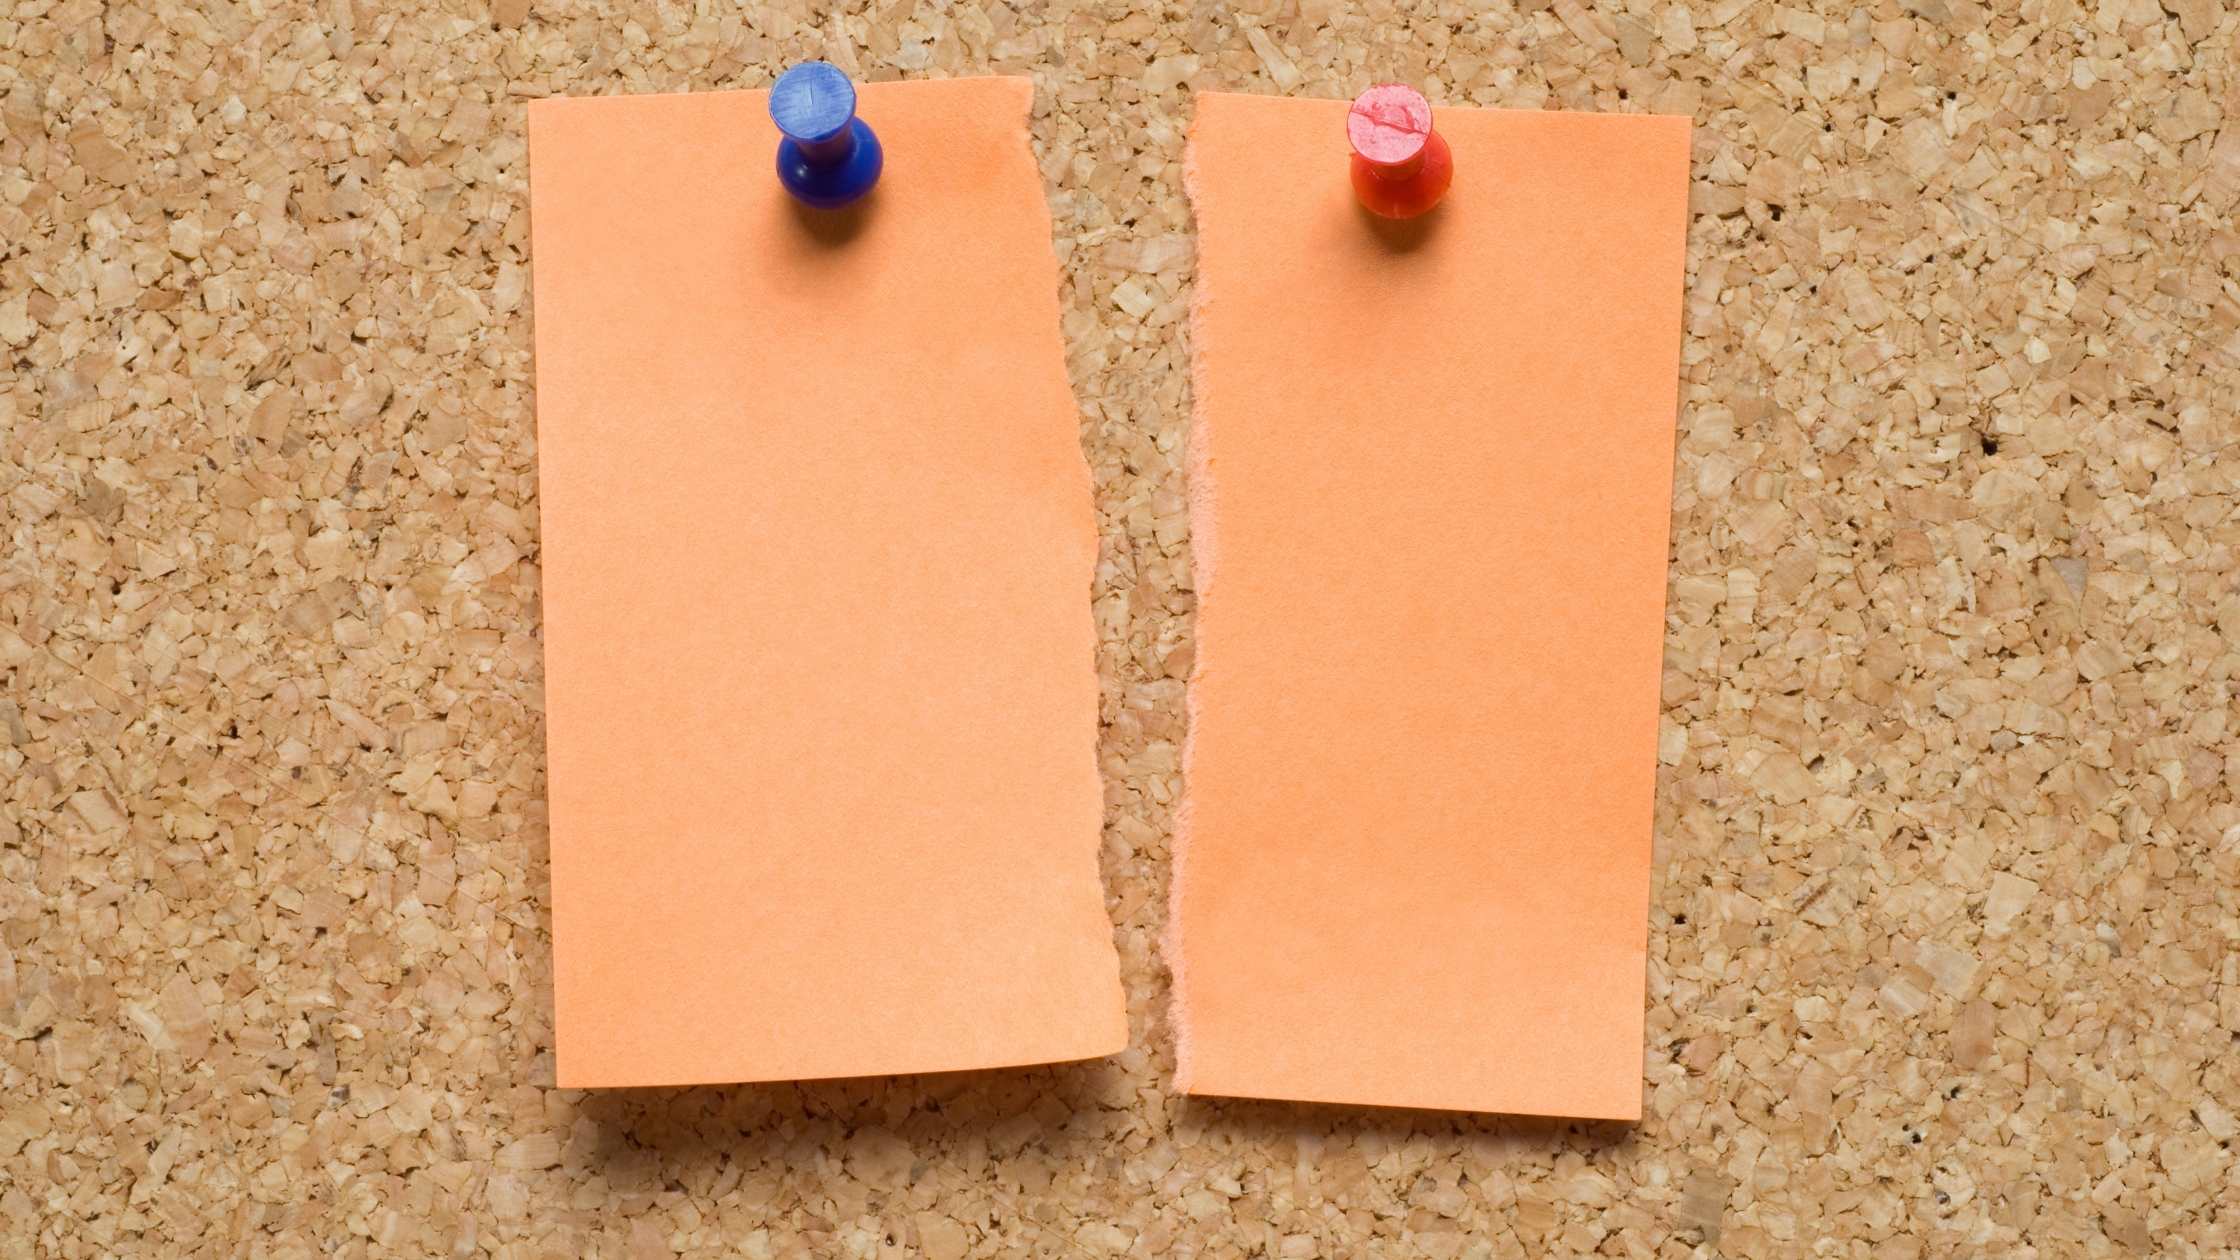 Post-it note torn in two pinned to a cork board